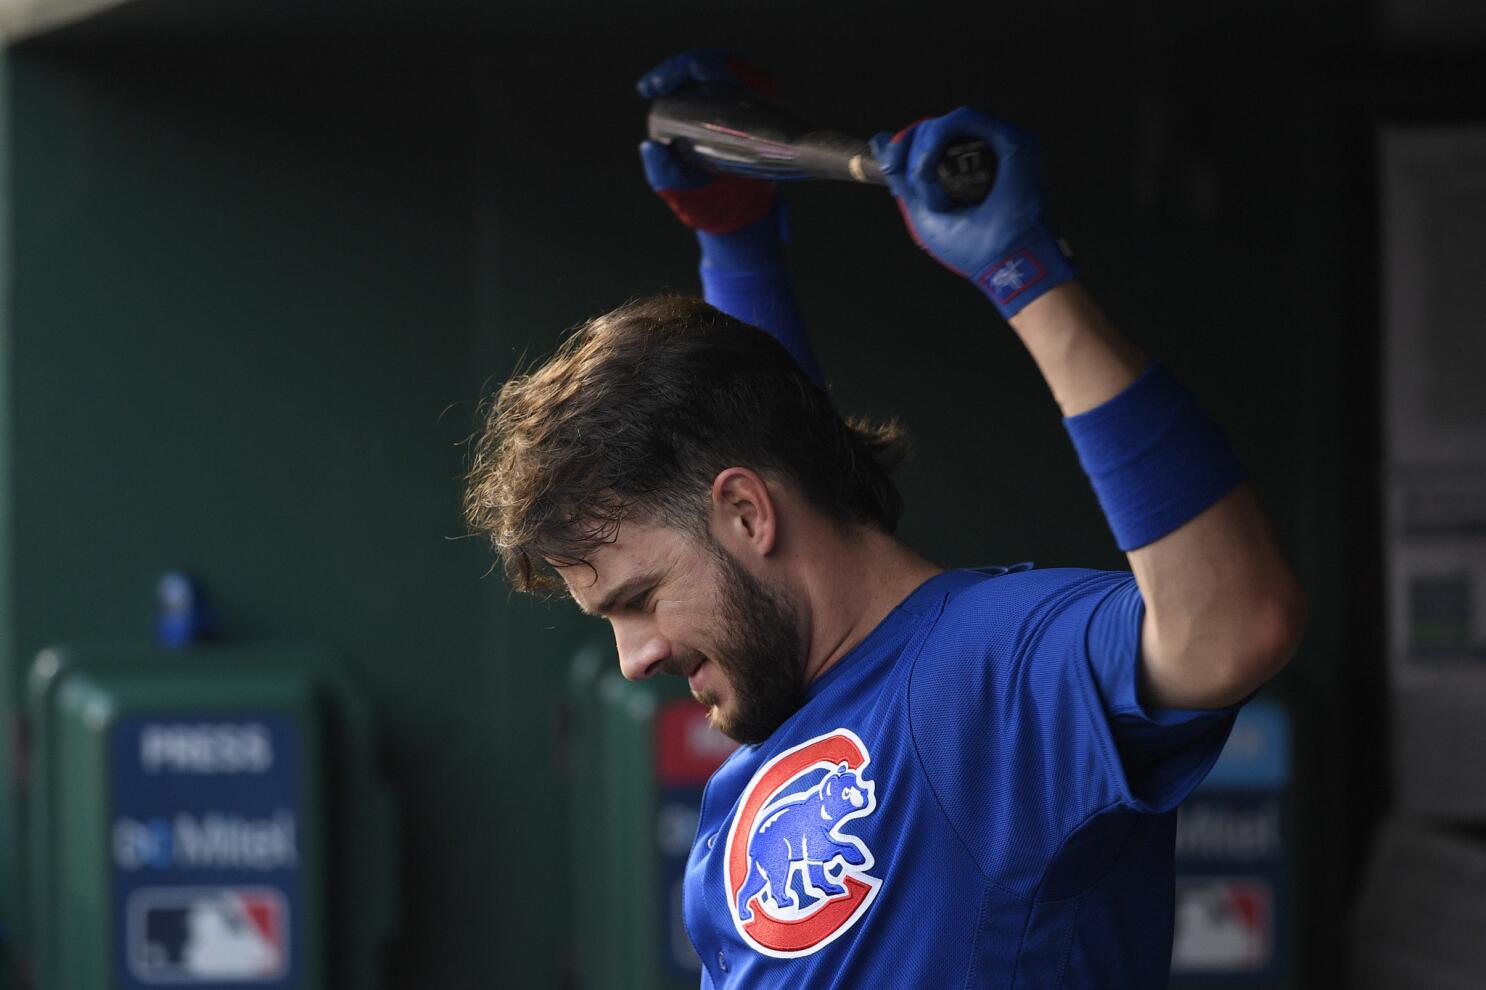 Cubs slugger Kris Bryant exits game after outfield collision - The